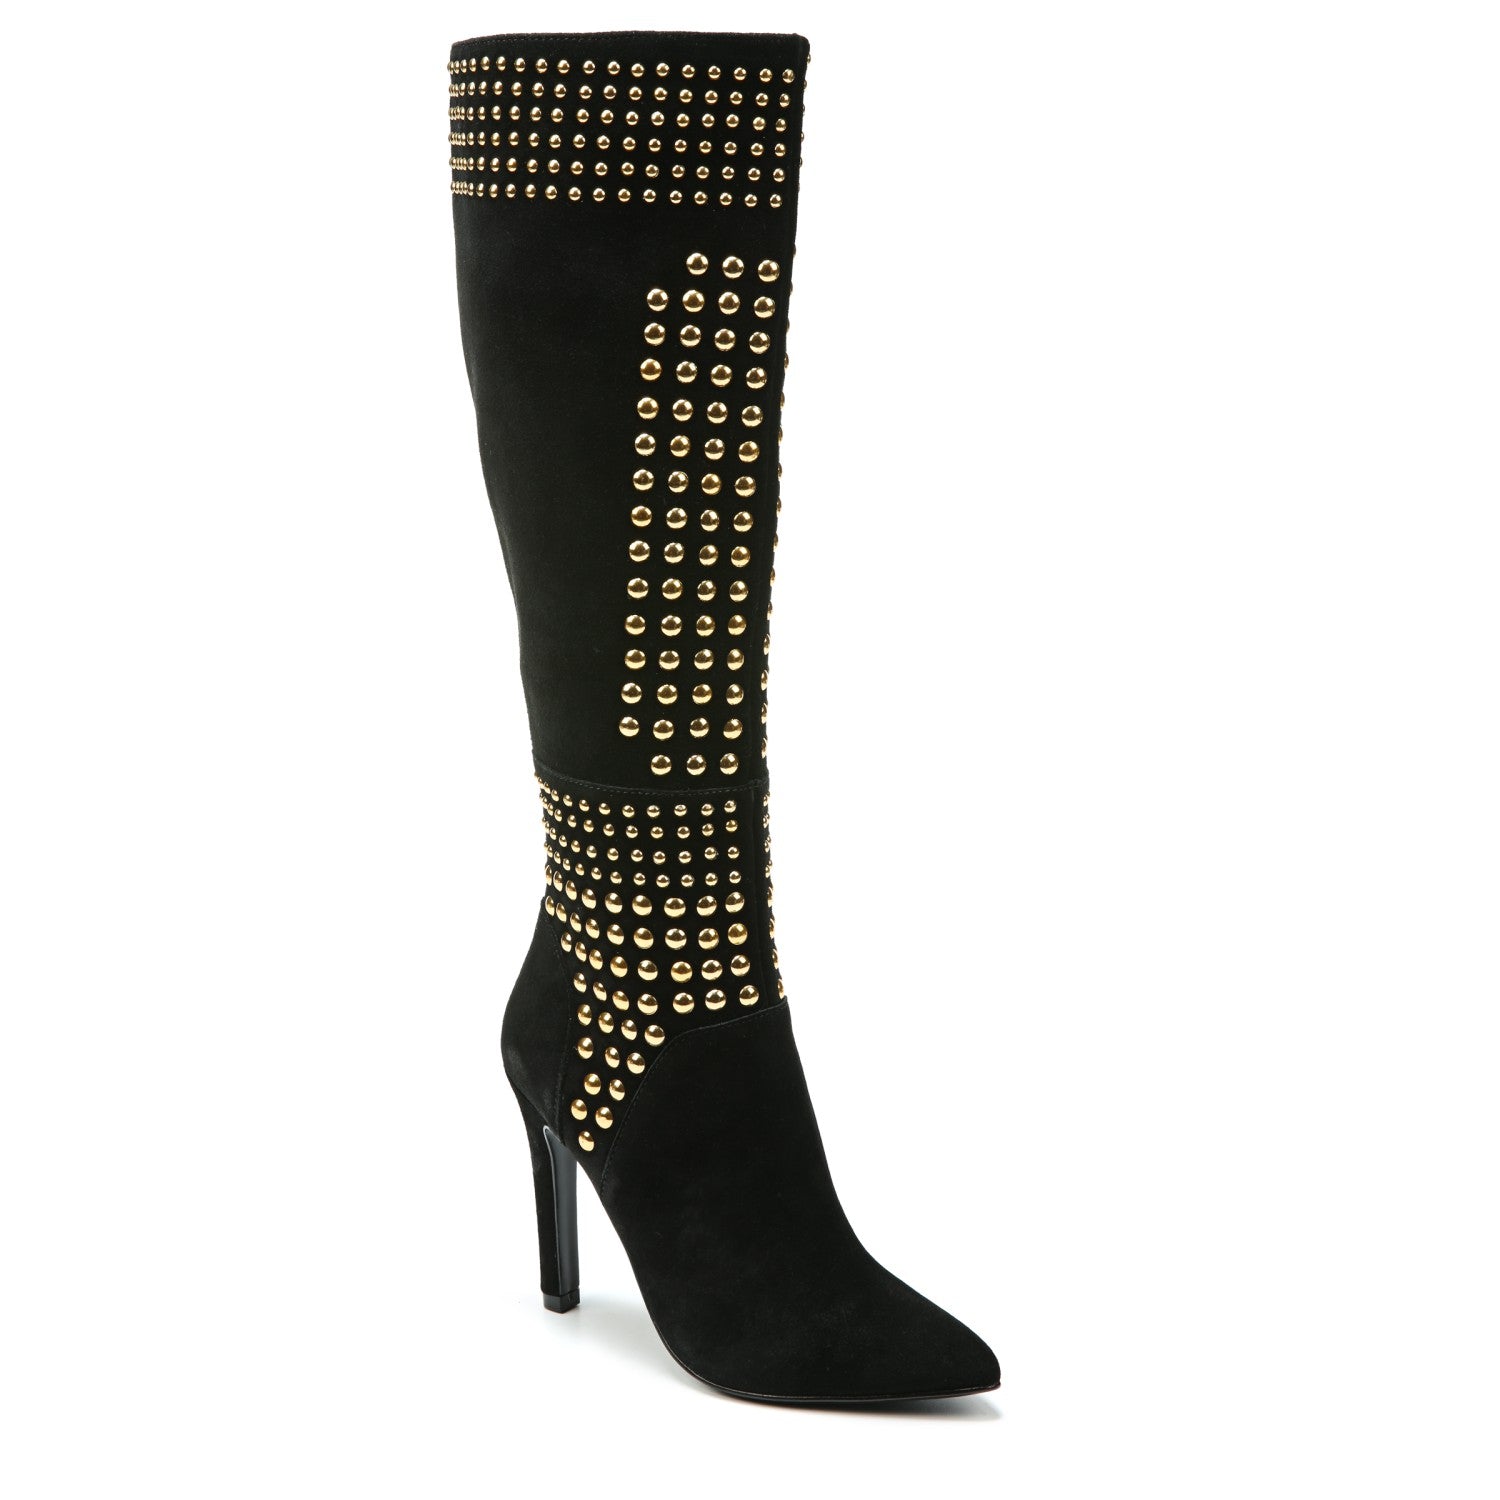 The Fergie Danica is sophistication all wrapped in this tall shaft suede leather boot with gold studded metal detailing and a pointed toe. Cow suede leather, 17.5" Shaft, Circumference 13", Synthetic traction outsole, Smooth lining, 4" Suede covered heel, Cushion insole for all day long comfort